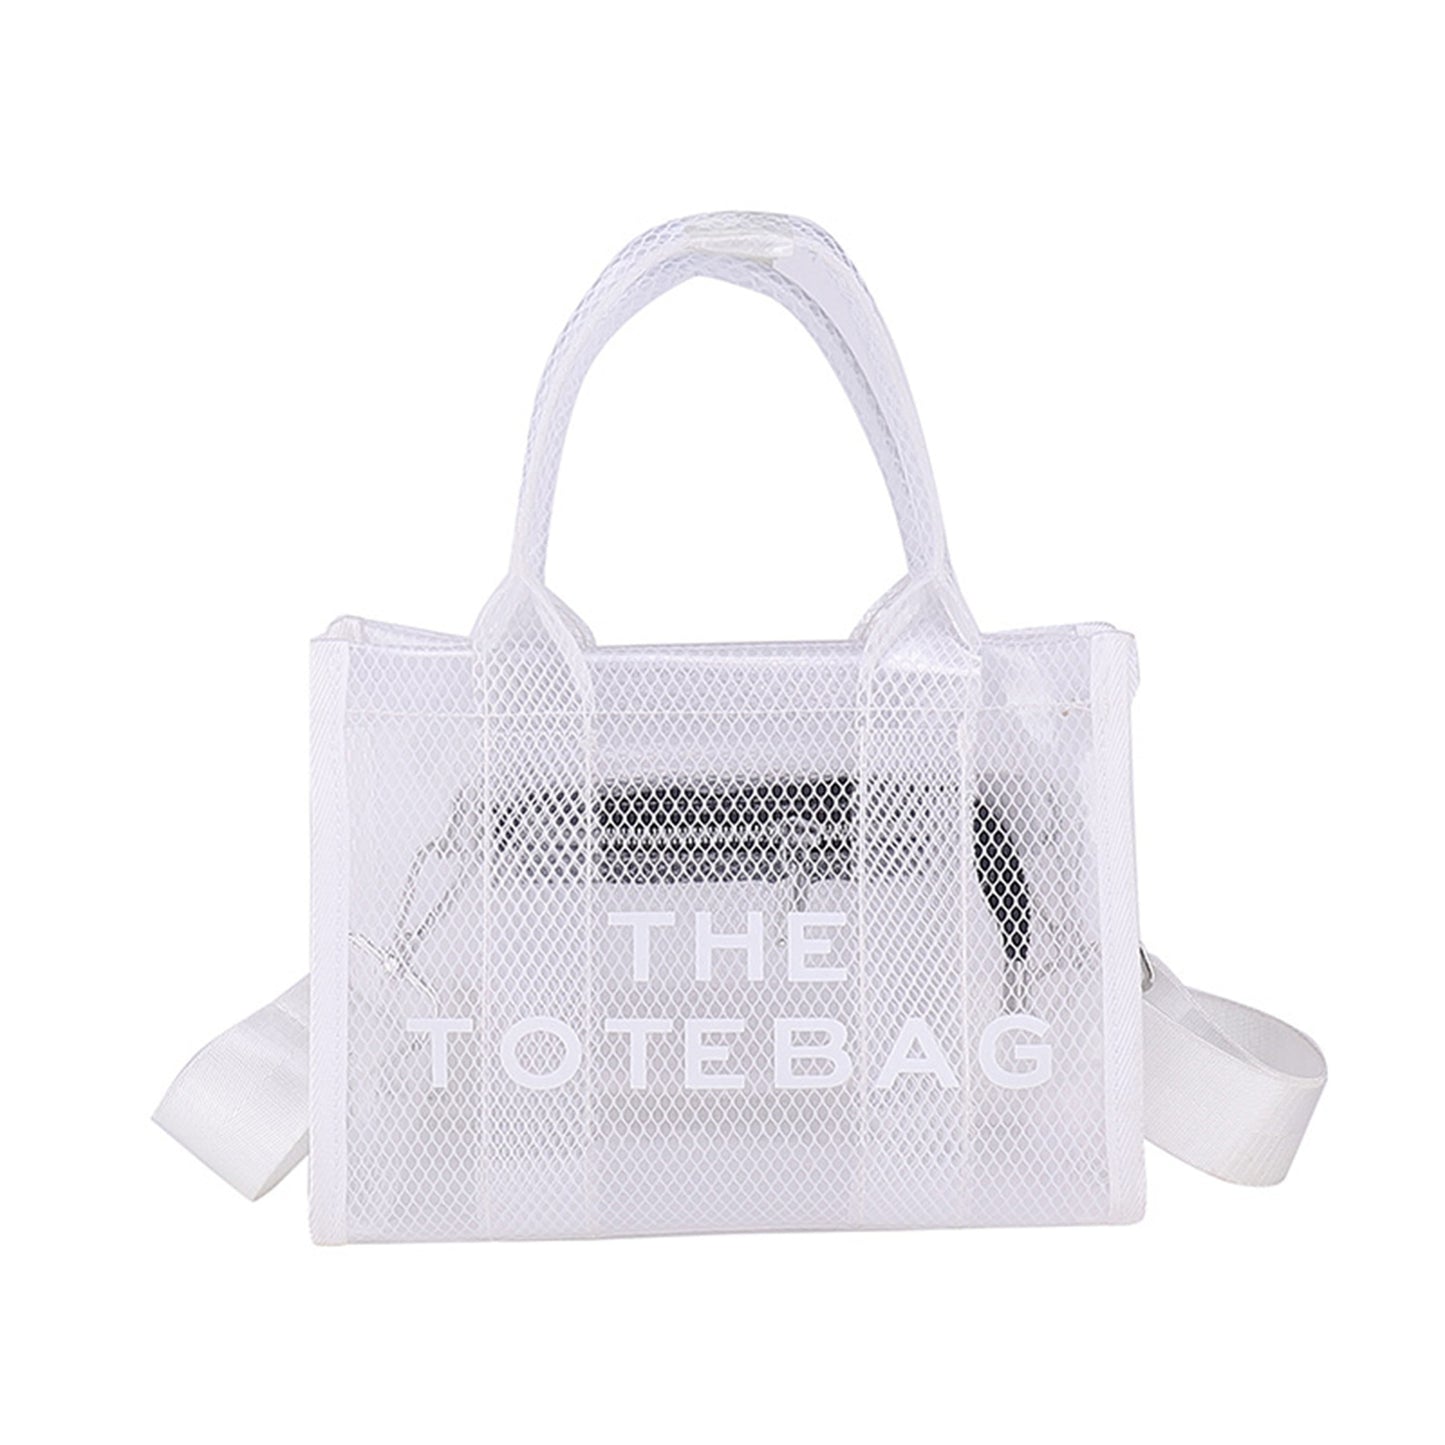 Summer Jelly Tote Bag